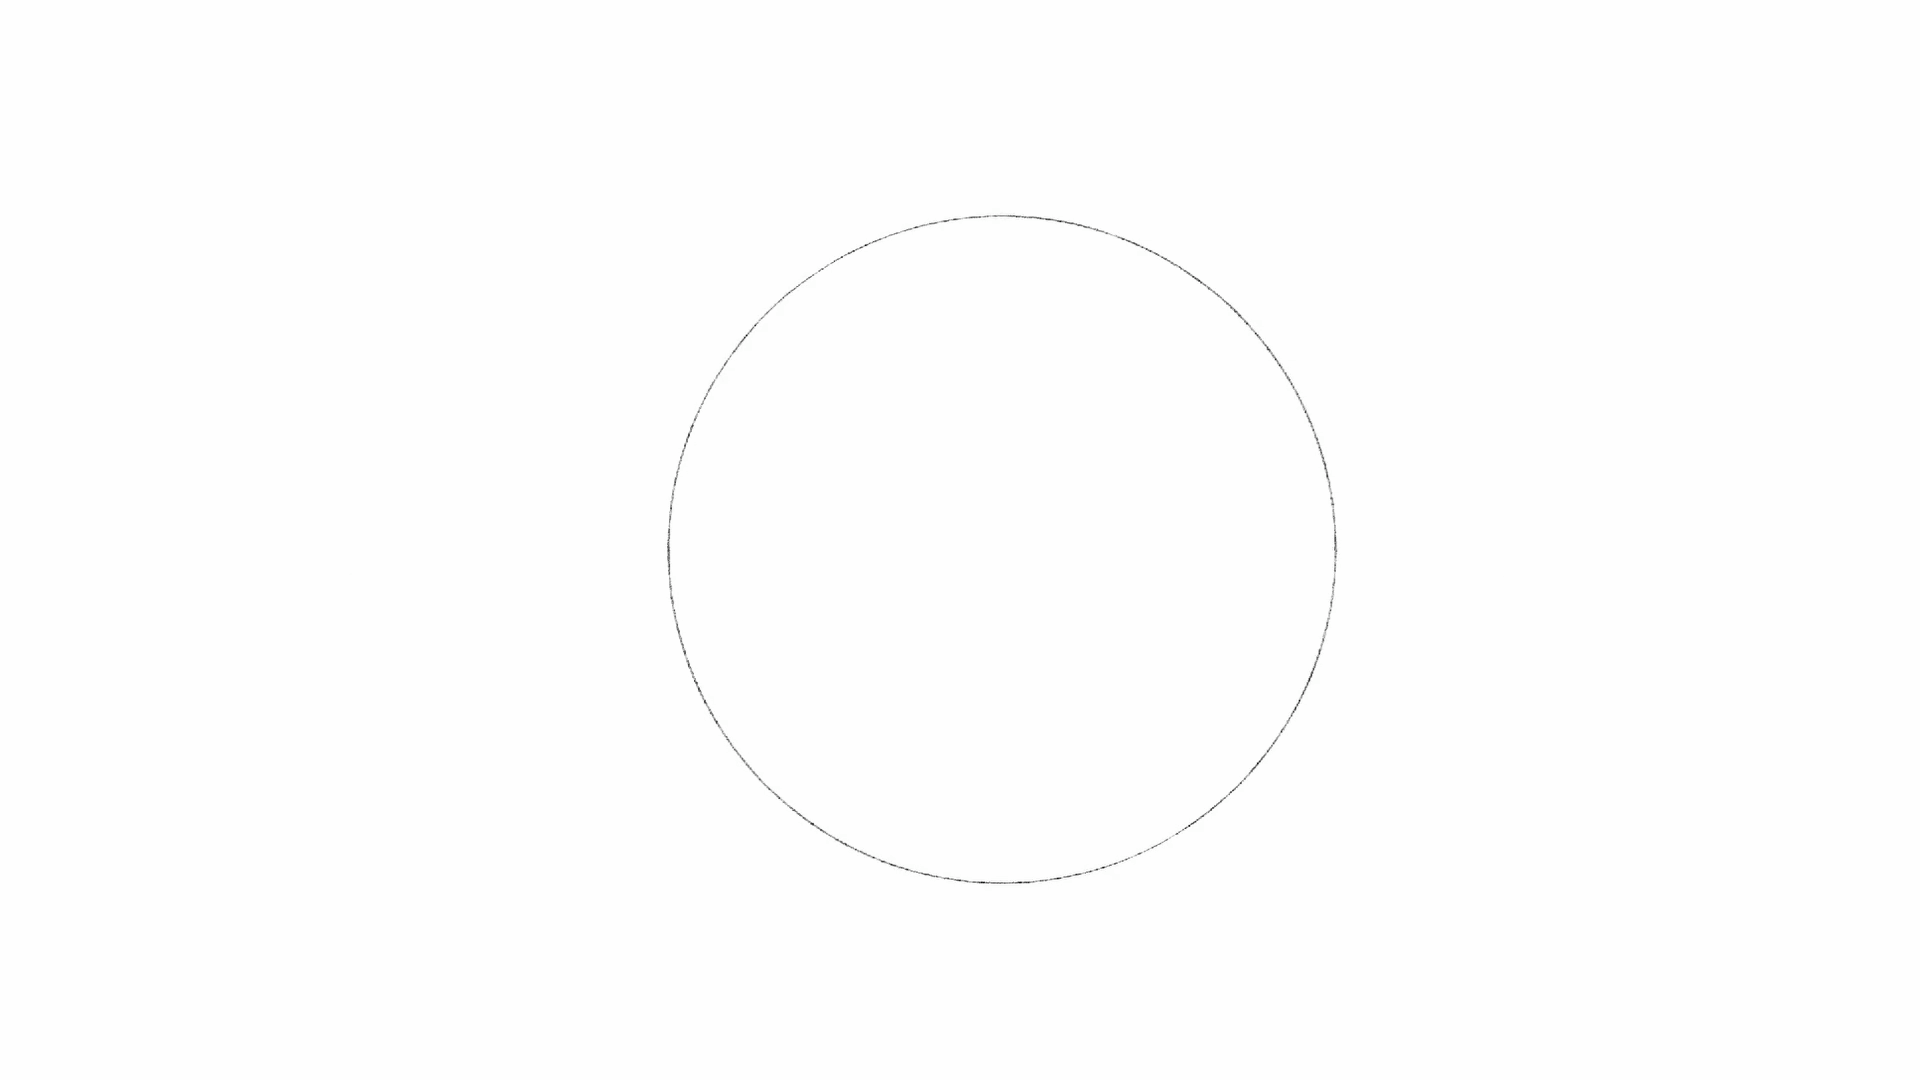 Step 1 of drawing the Apple logo: Draw the first circle